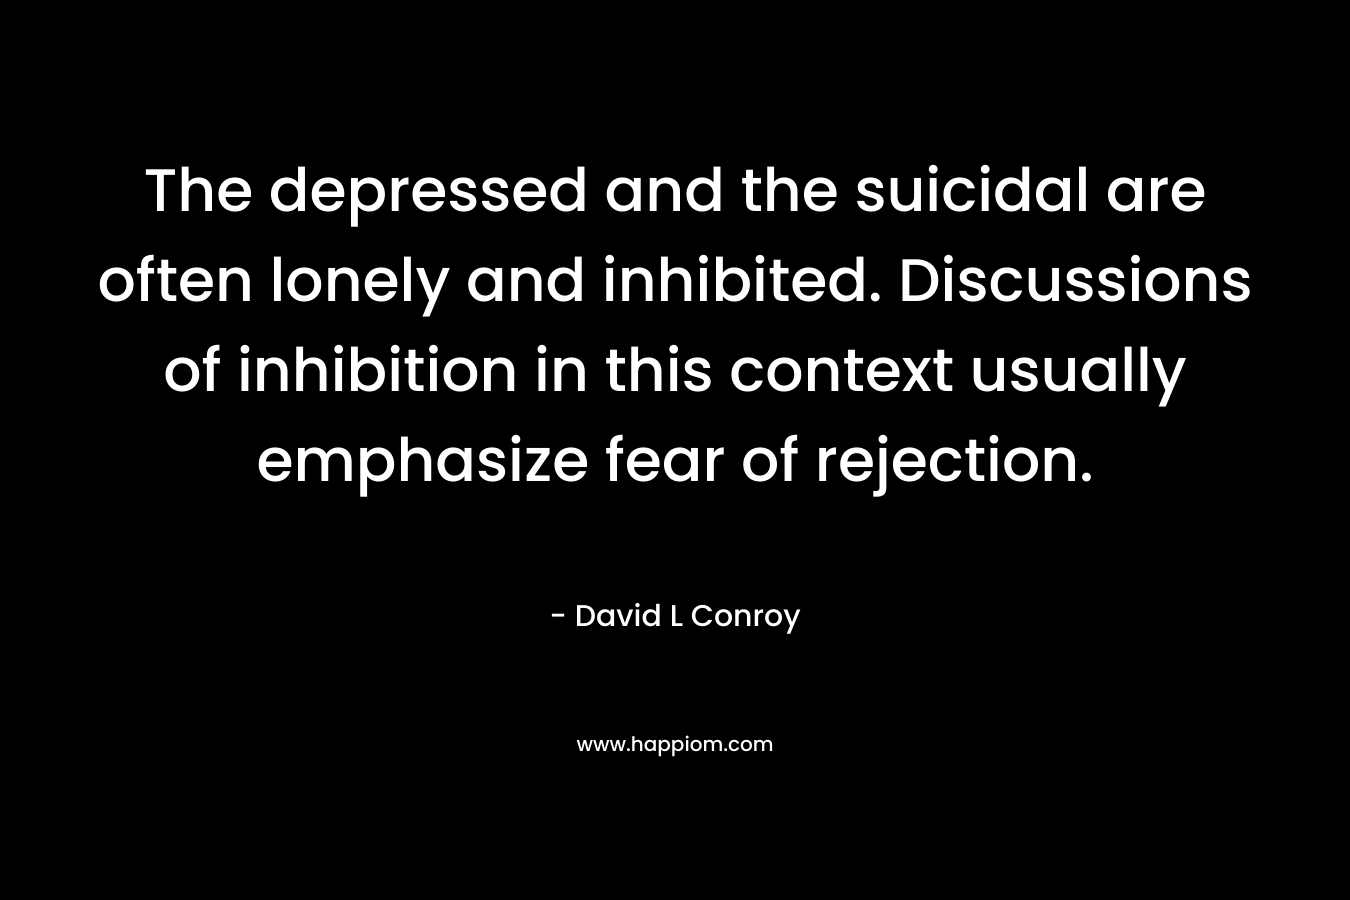 The depressed and the suicidal are often lonely and inhibited. Discussions of inhibition in this context usually emphasize fear of rejection. – David L Conroy